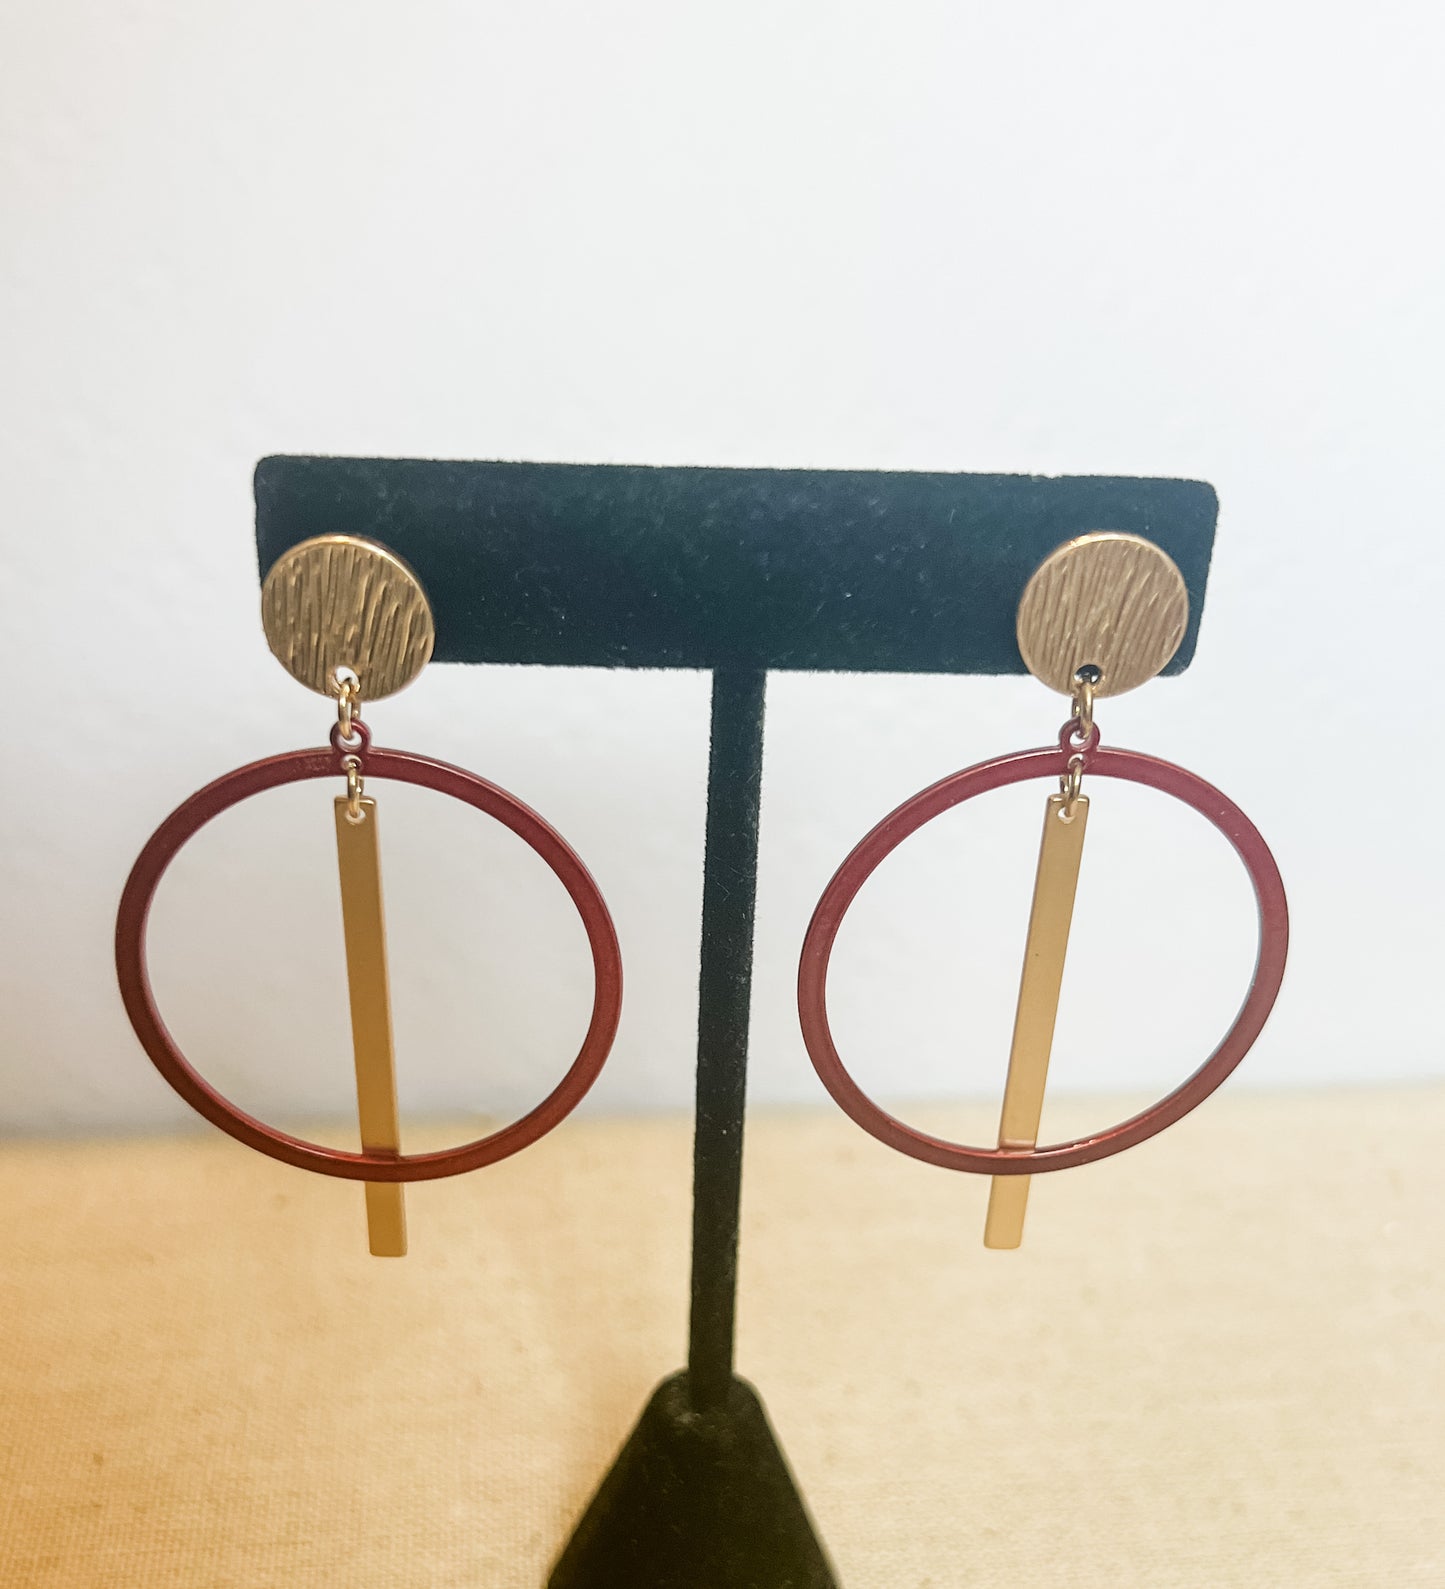 The Intersection Earrings